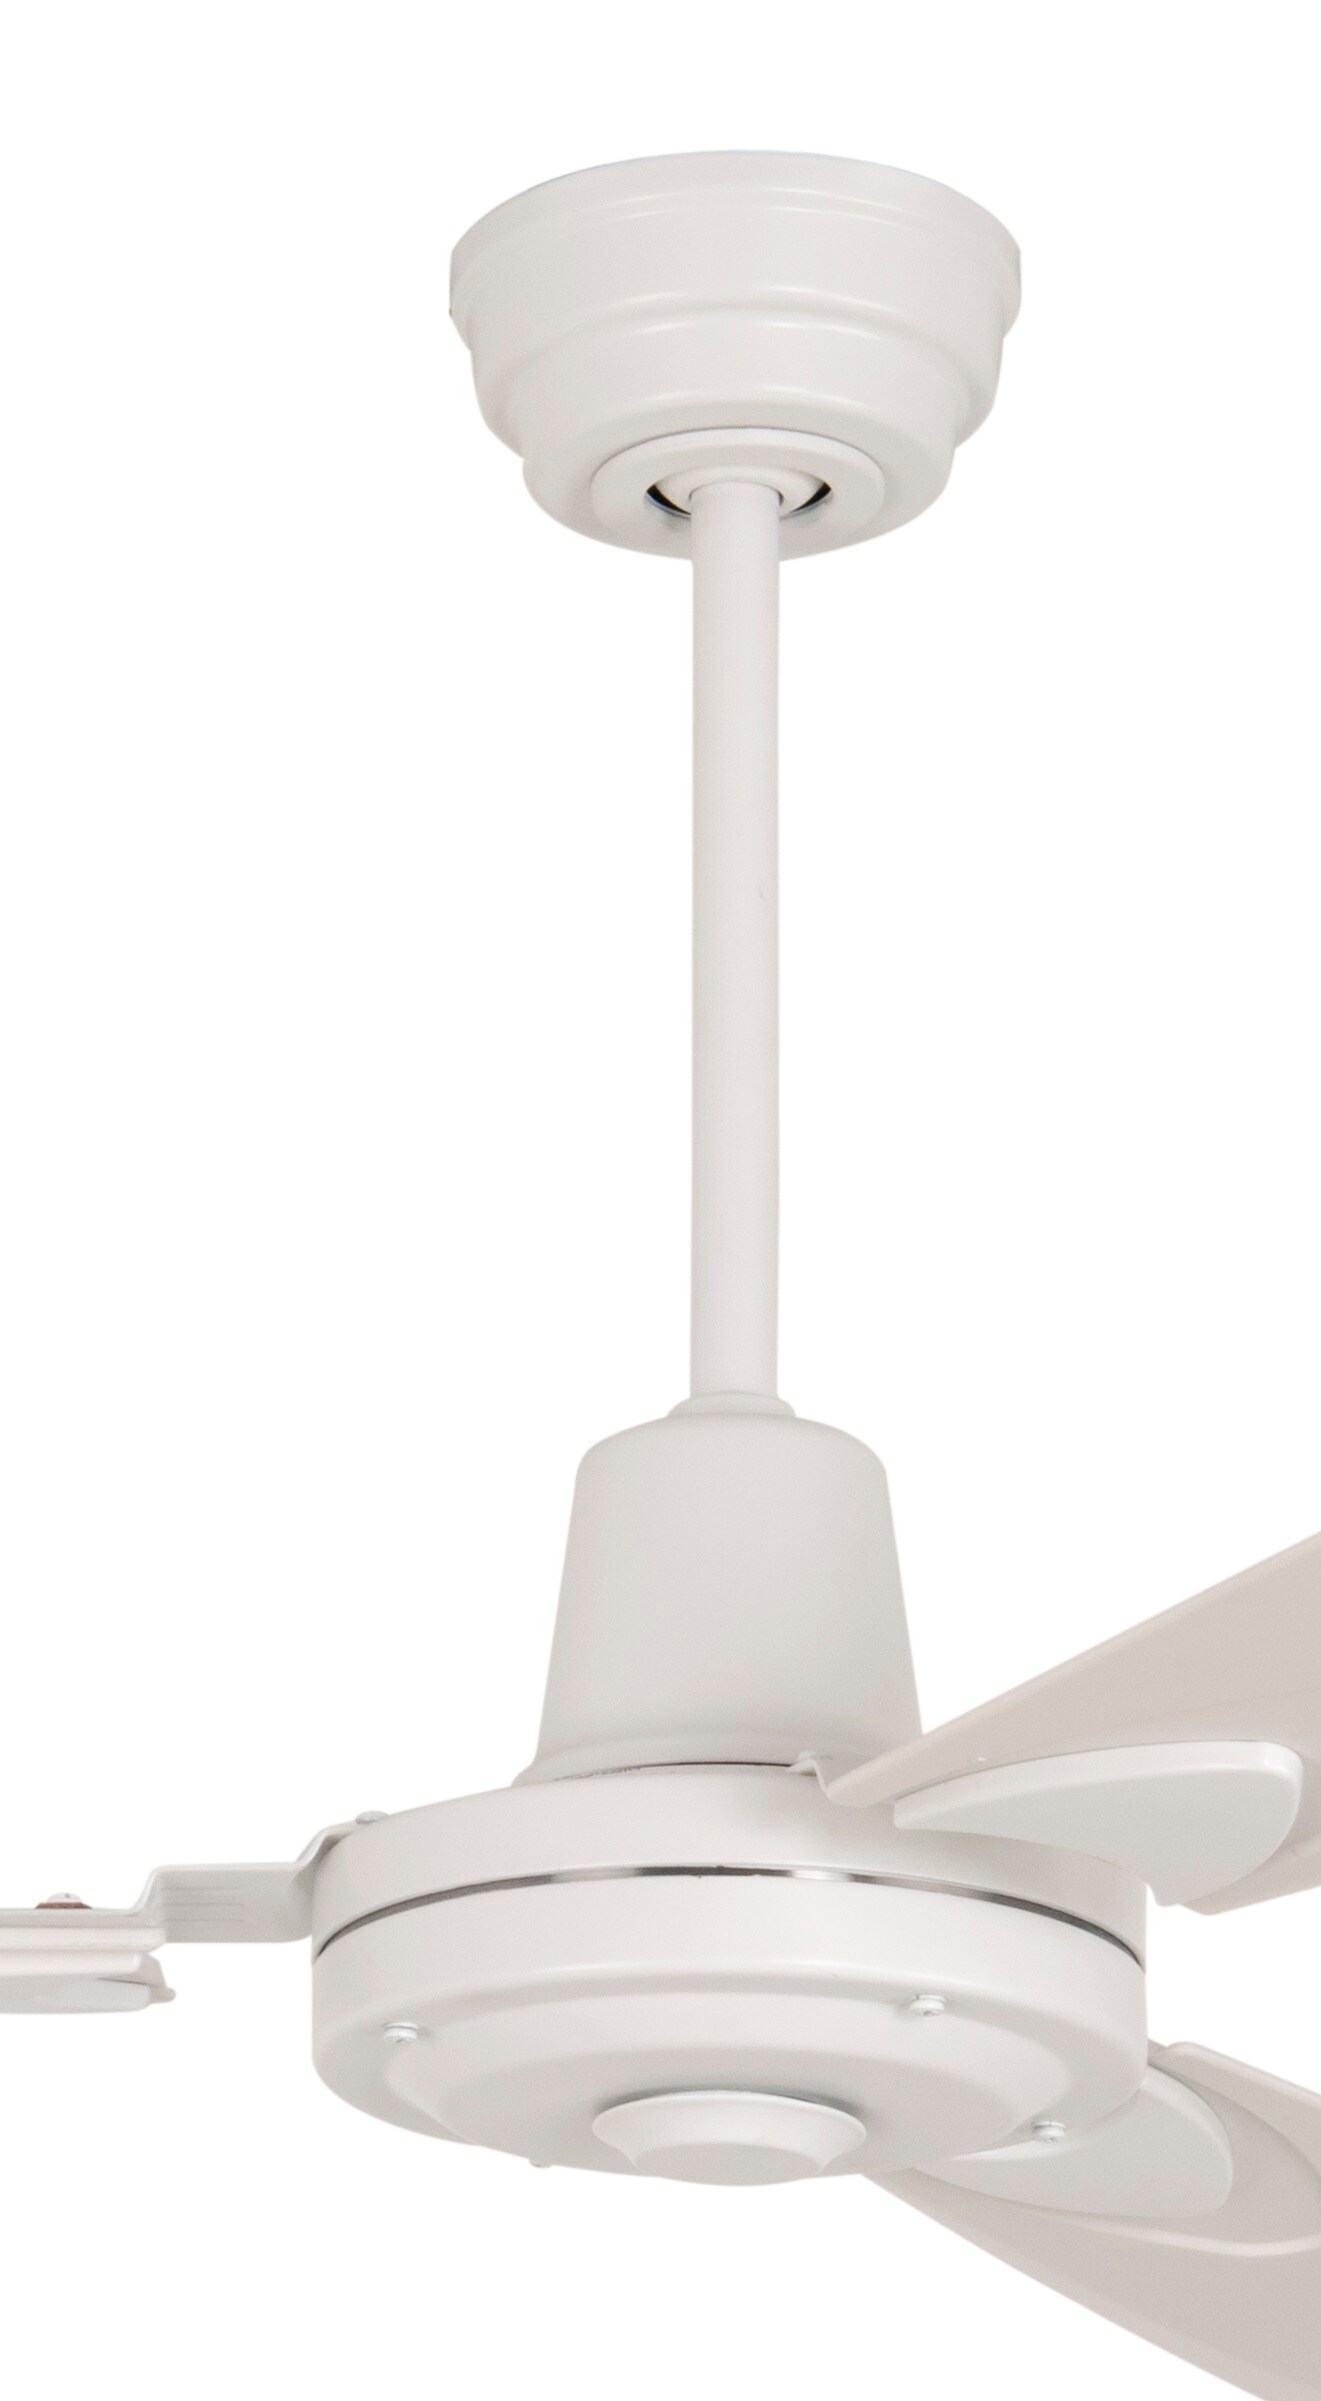 Craftmade Velocity 58-in White Indoor Ceiling Fan (3-Blade)